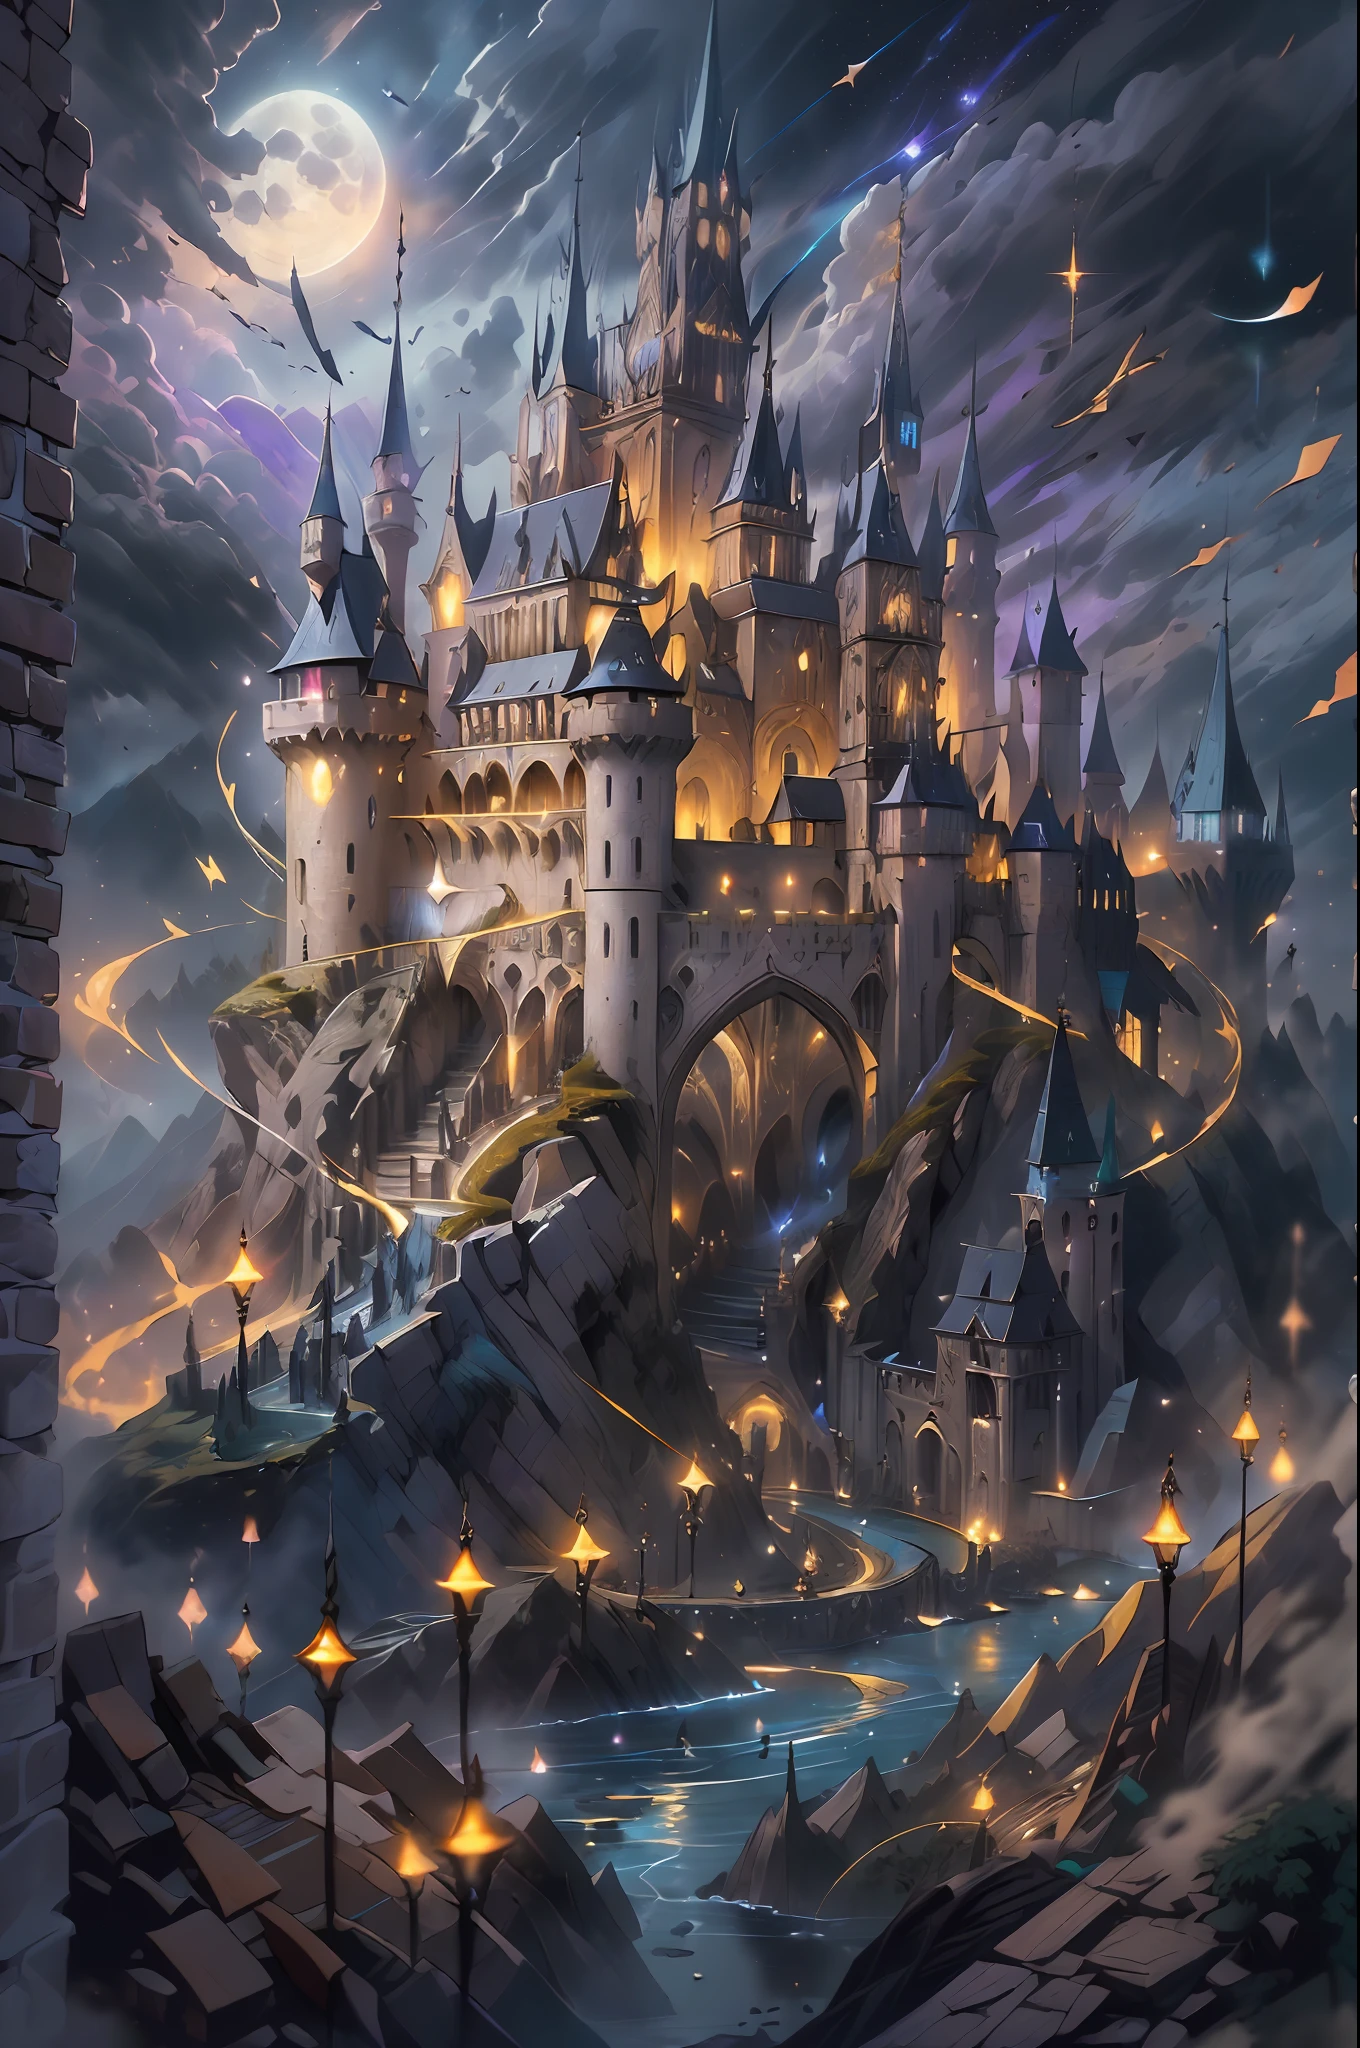 a full panoramic picture of a magical castle [[hovering]] (intense details, Masterpiece, best quality: 1.6) in the sky (intense details, Masterpiece, best quality: 1.5), [[in the sky]] hanging among the clouds (intense details, Masterpiece, best quality: 1.5) at night, flying castle in the sky (intense details, Masterpiece, best quality: 1.5), moon light, stars. many colors light from castle windows, dragons  (intense details, Masterpiece, best quality: 1.5) flying around castle, atmosphere of enchantment and, atmosphere of magic (intense details, Masterpiece, best quality: 1.5), 8k, ultra detailed, masterpiece, best quality, (extremely detailed)